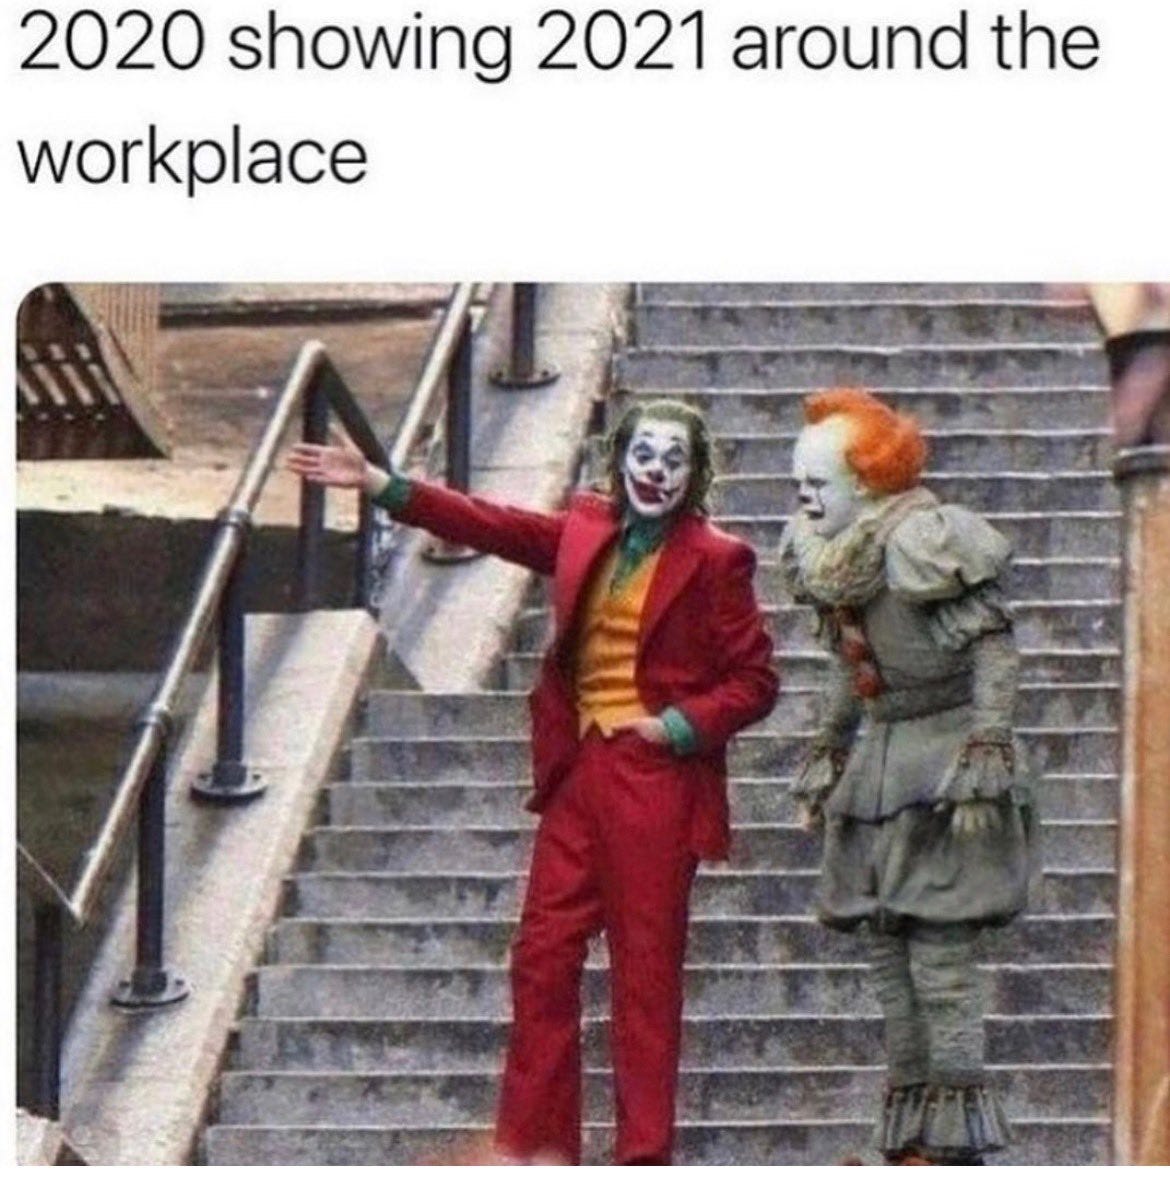 Joaquin Phoenix as The Joker points something out to Pennywise the Clown. Caption: 2020 showing 2021 around the workplace.